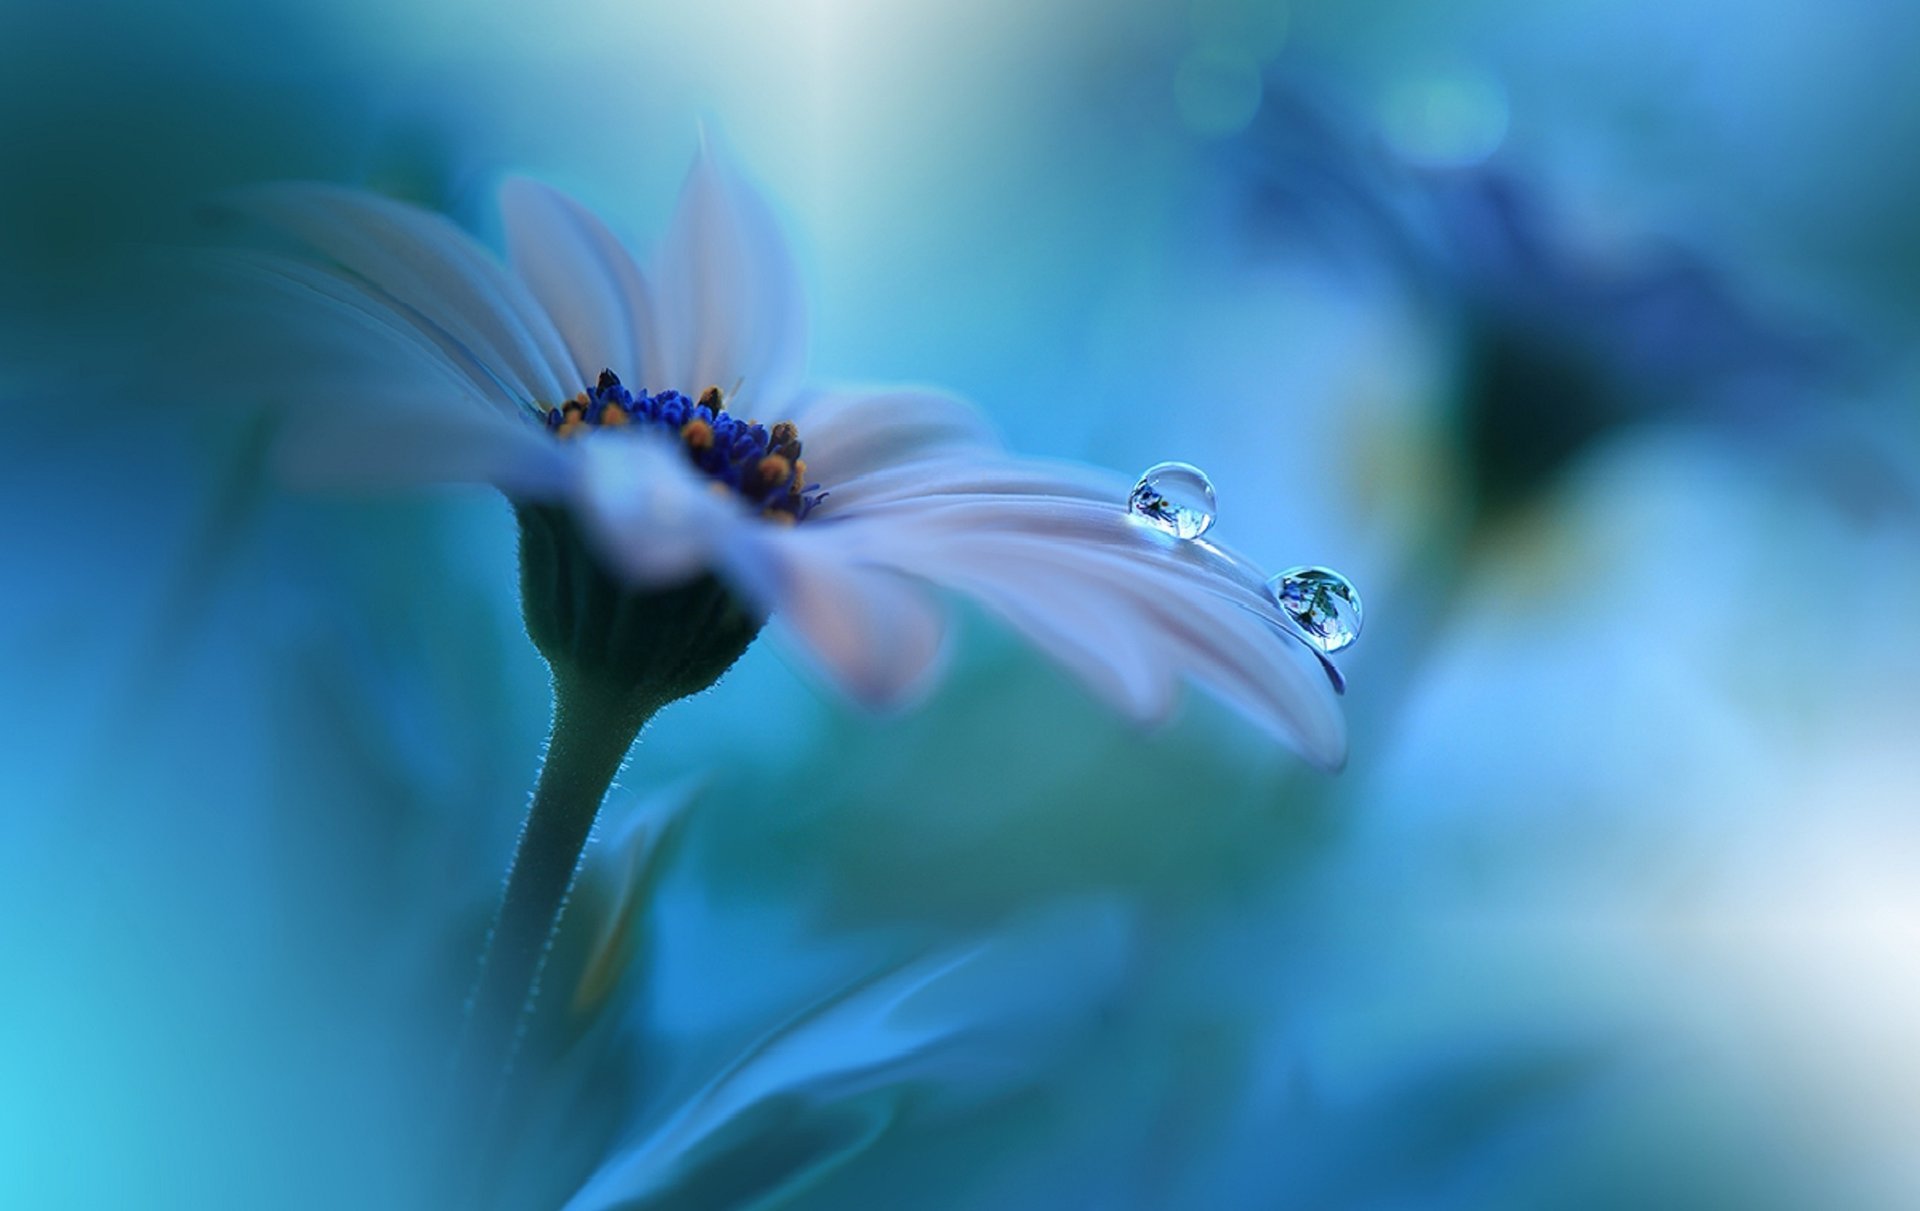 Dewdrops on the petals of a blue flower